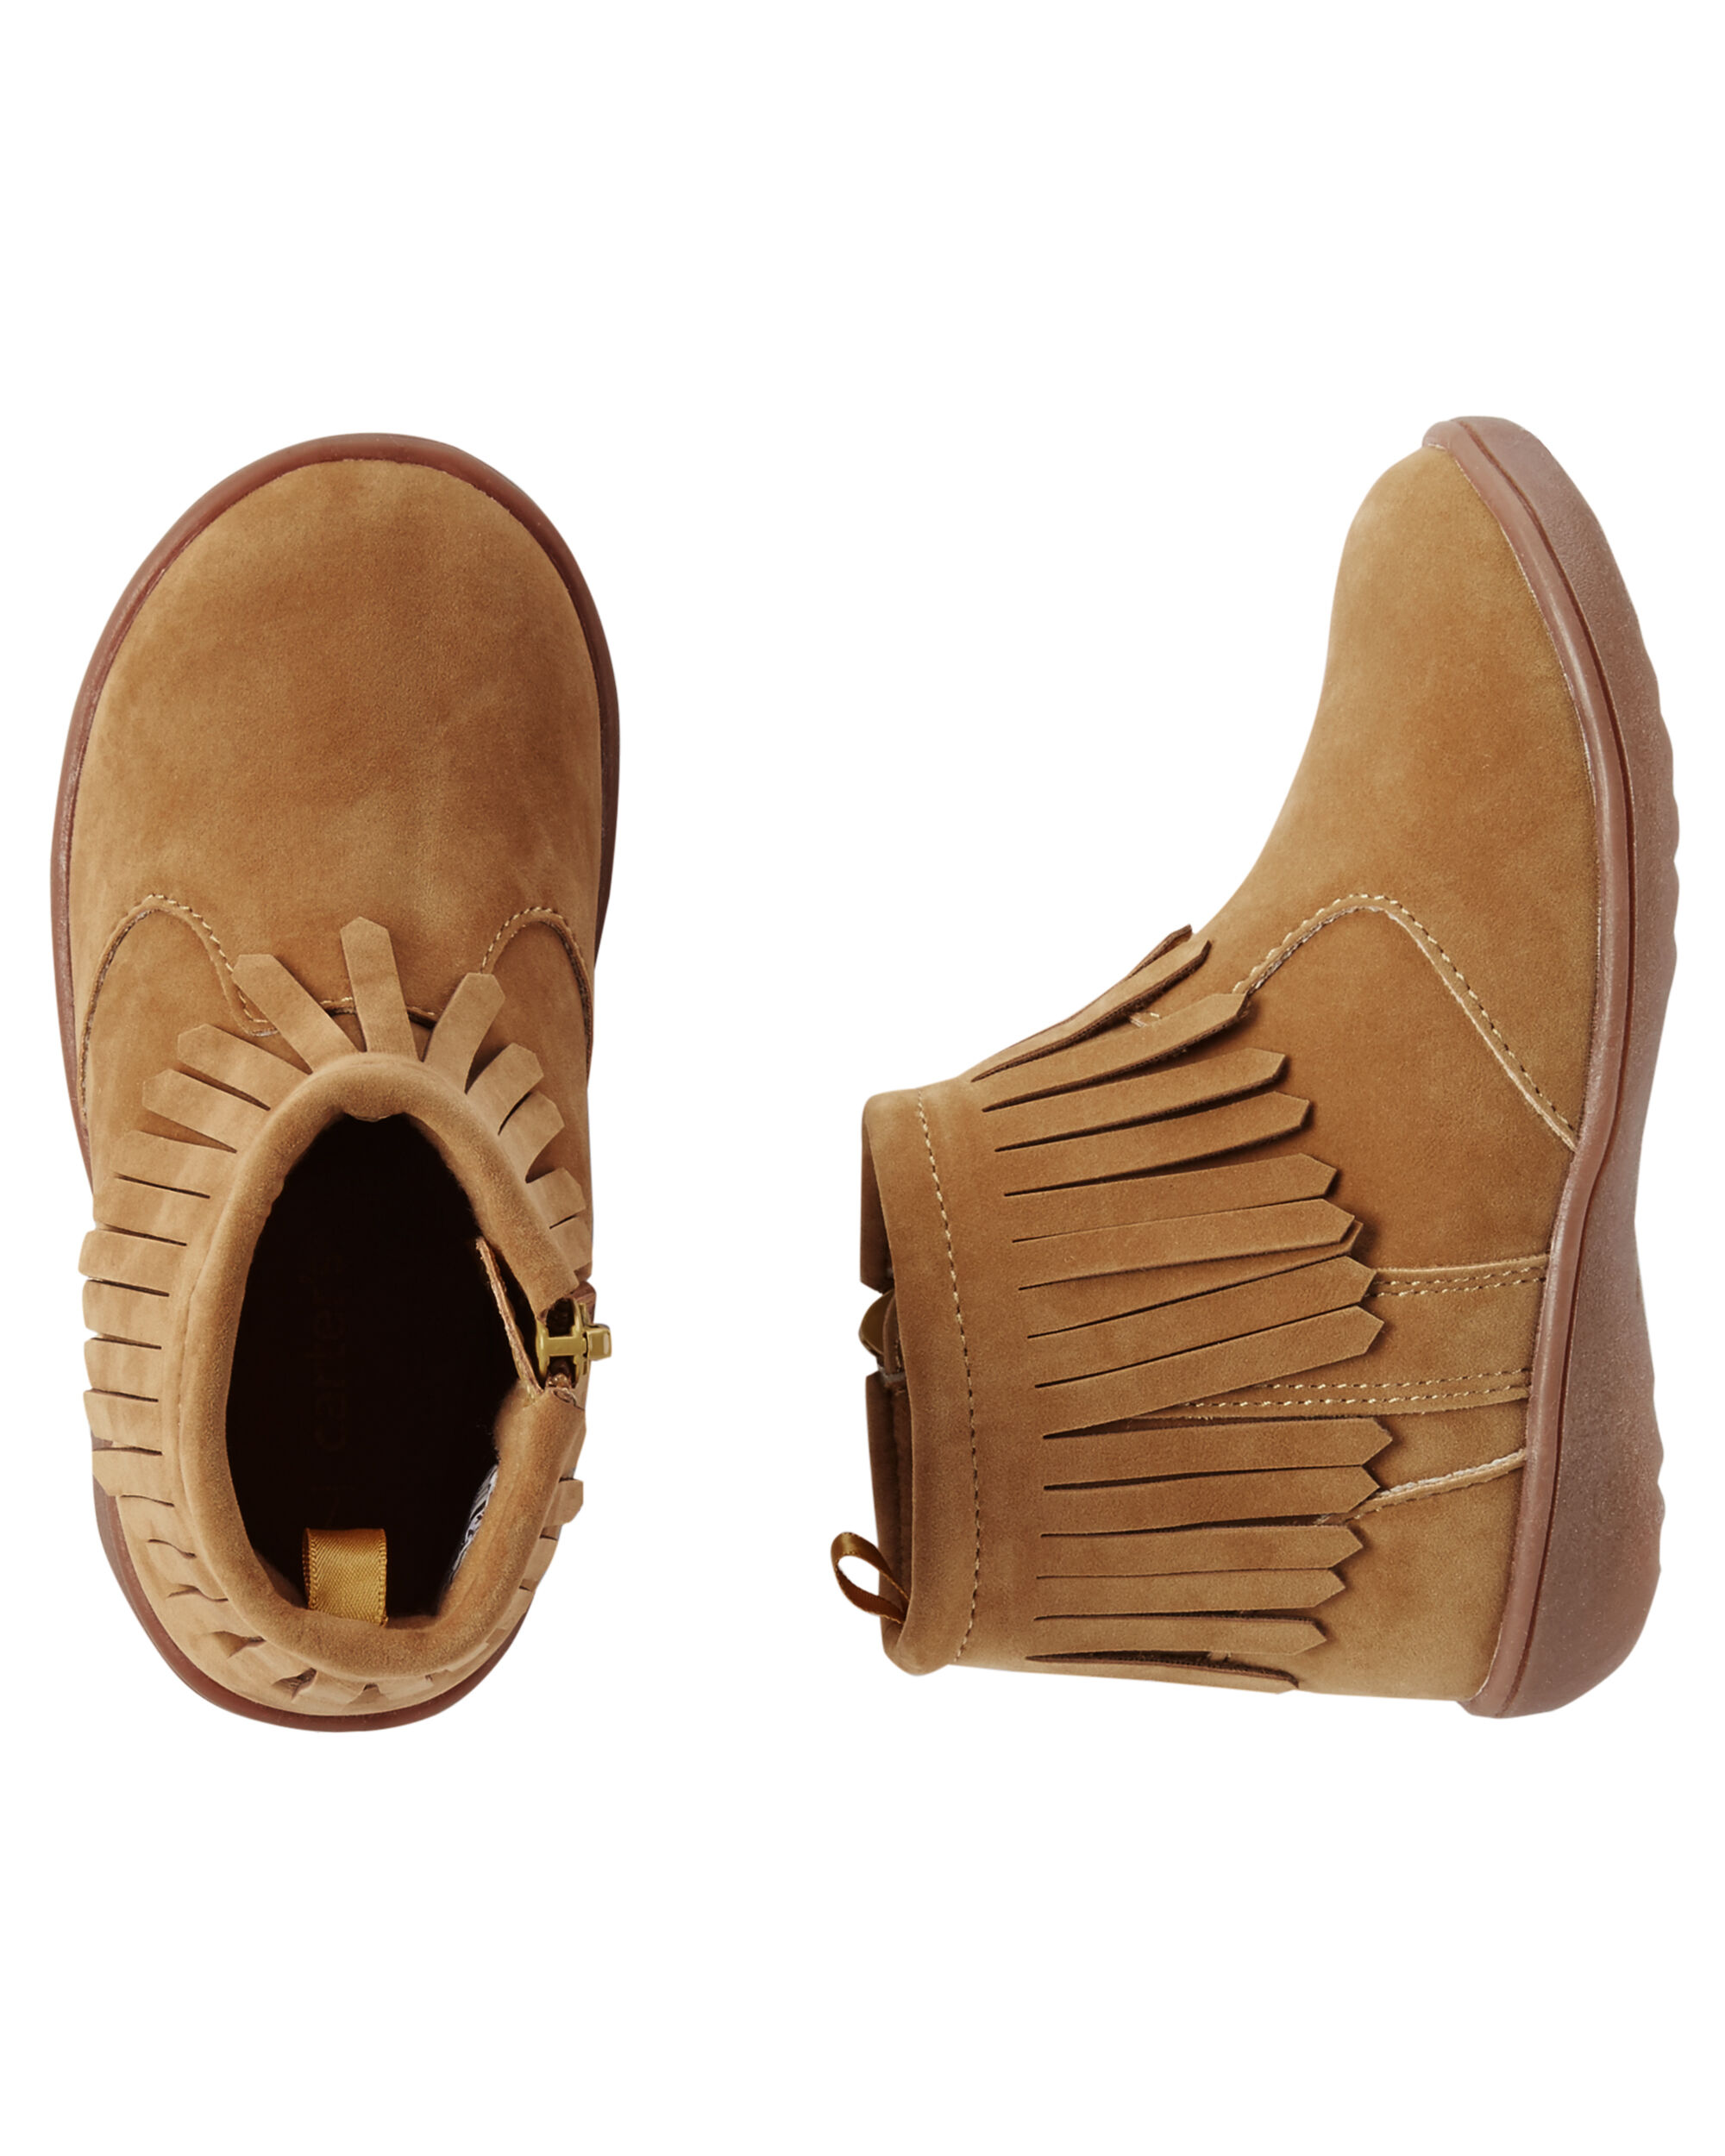 Carter's Moccasin Ankle Boots | carters.com